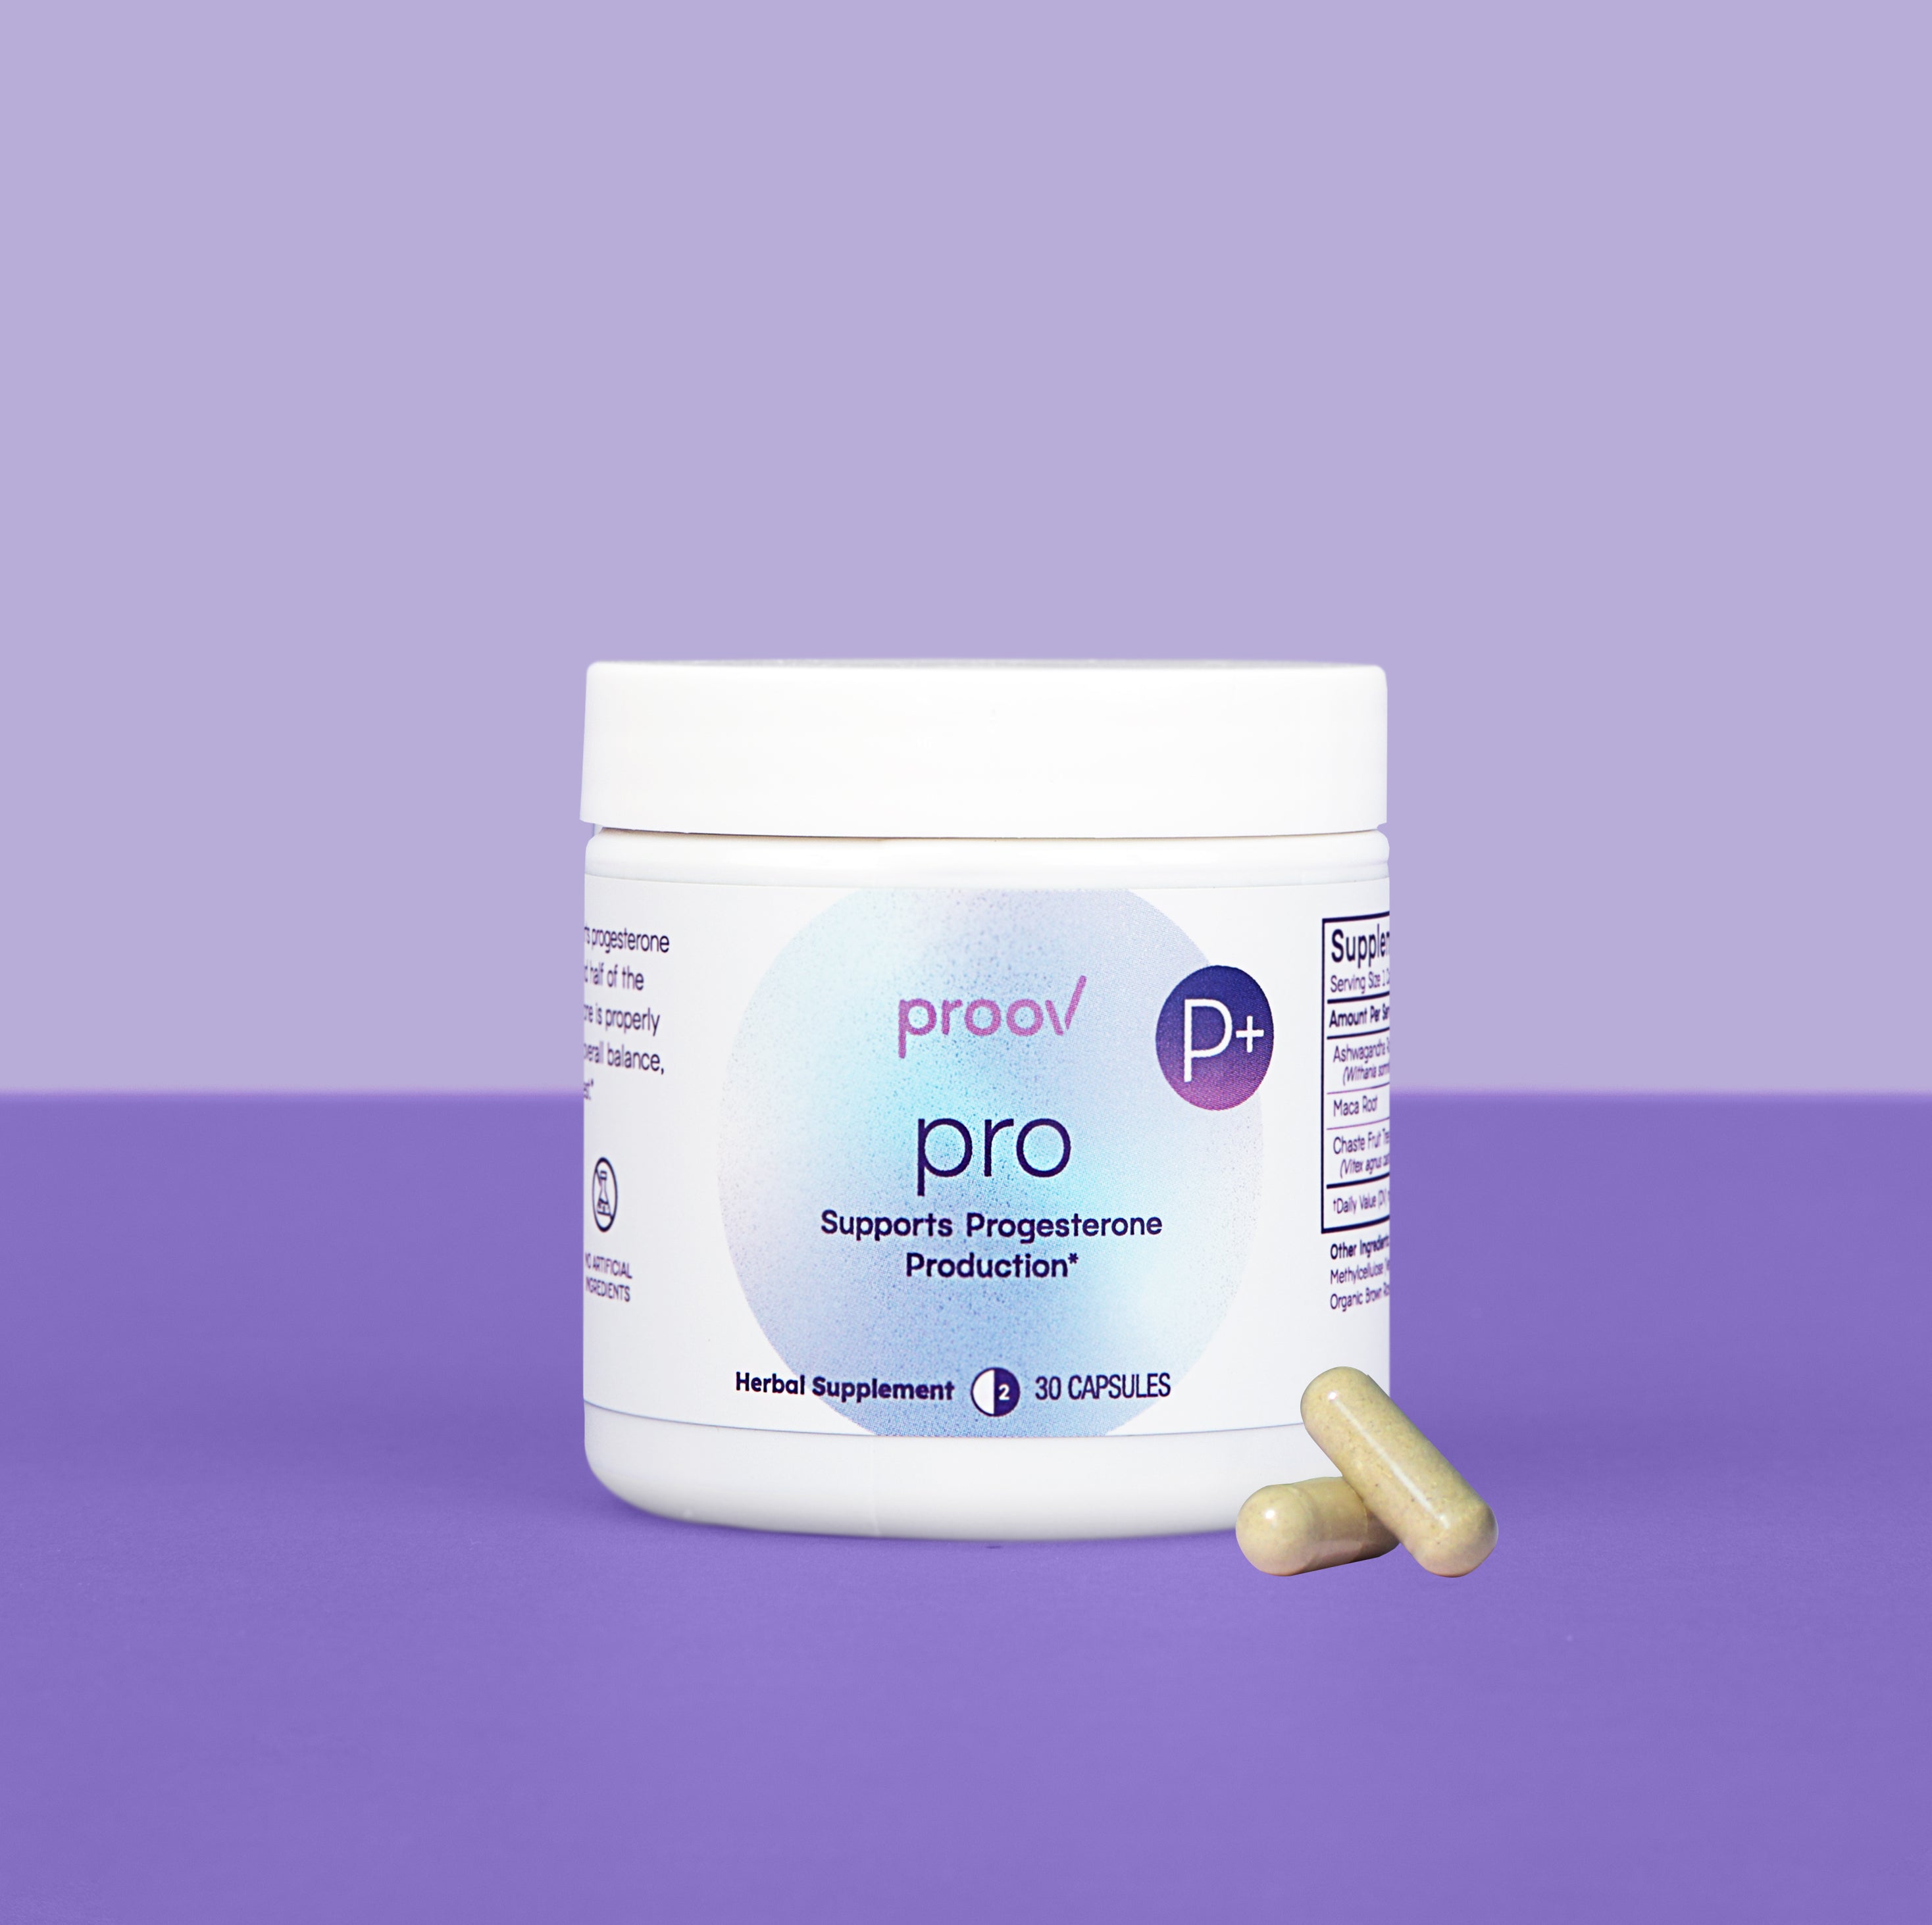 Pro Herbal Supplement by Proov